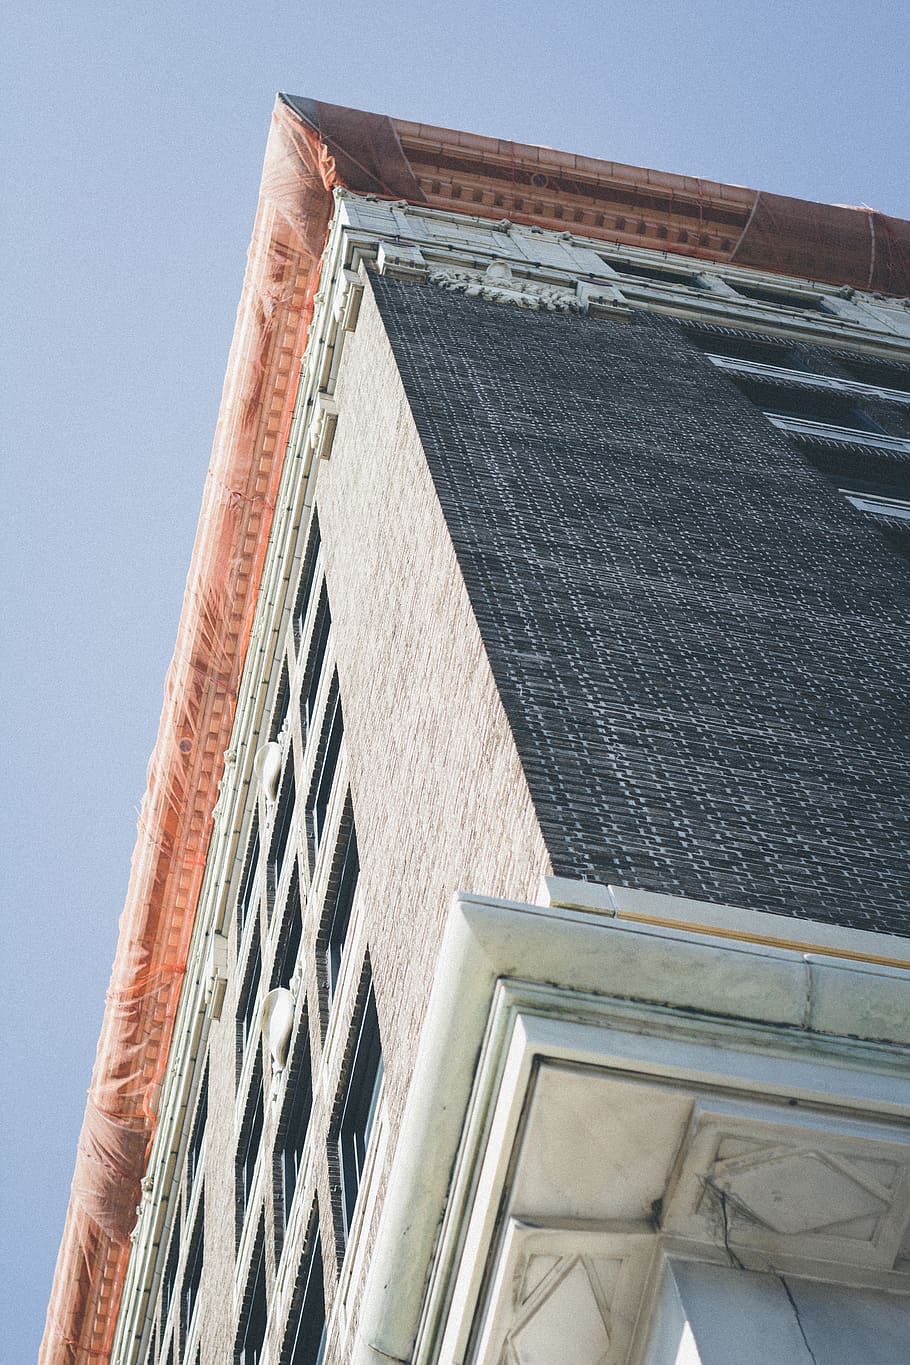 wilmington, united states, brick, sky, building, history, downtown